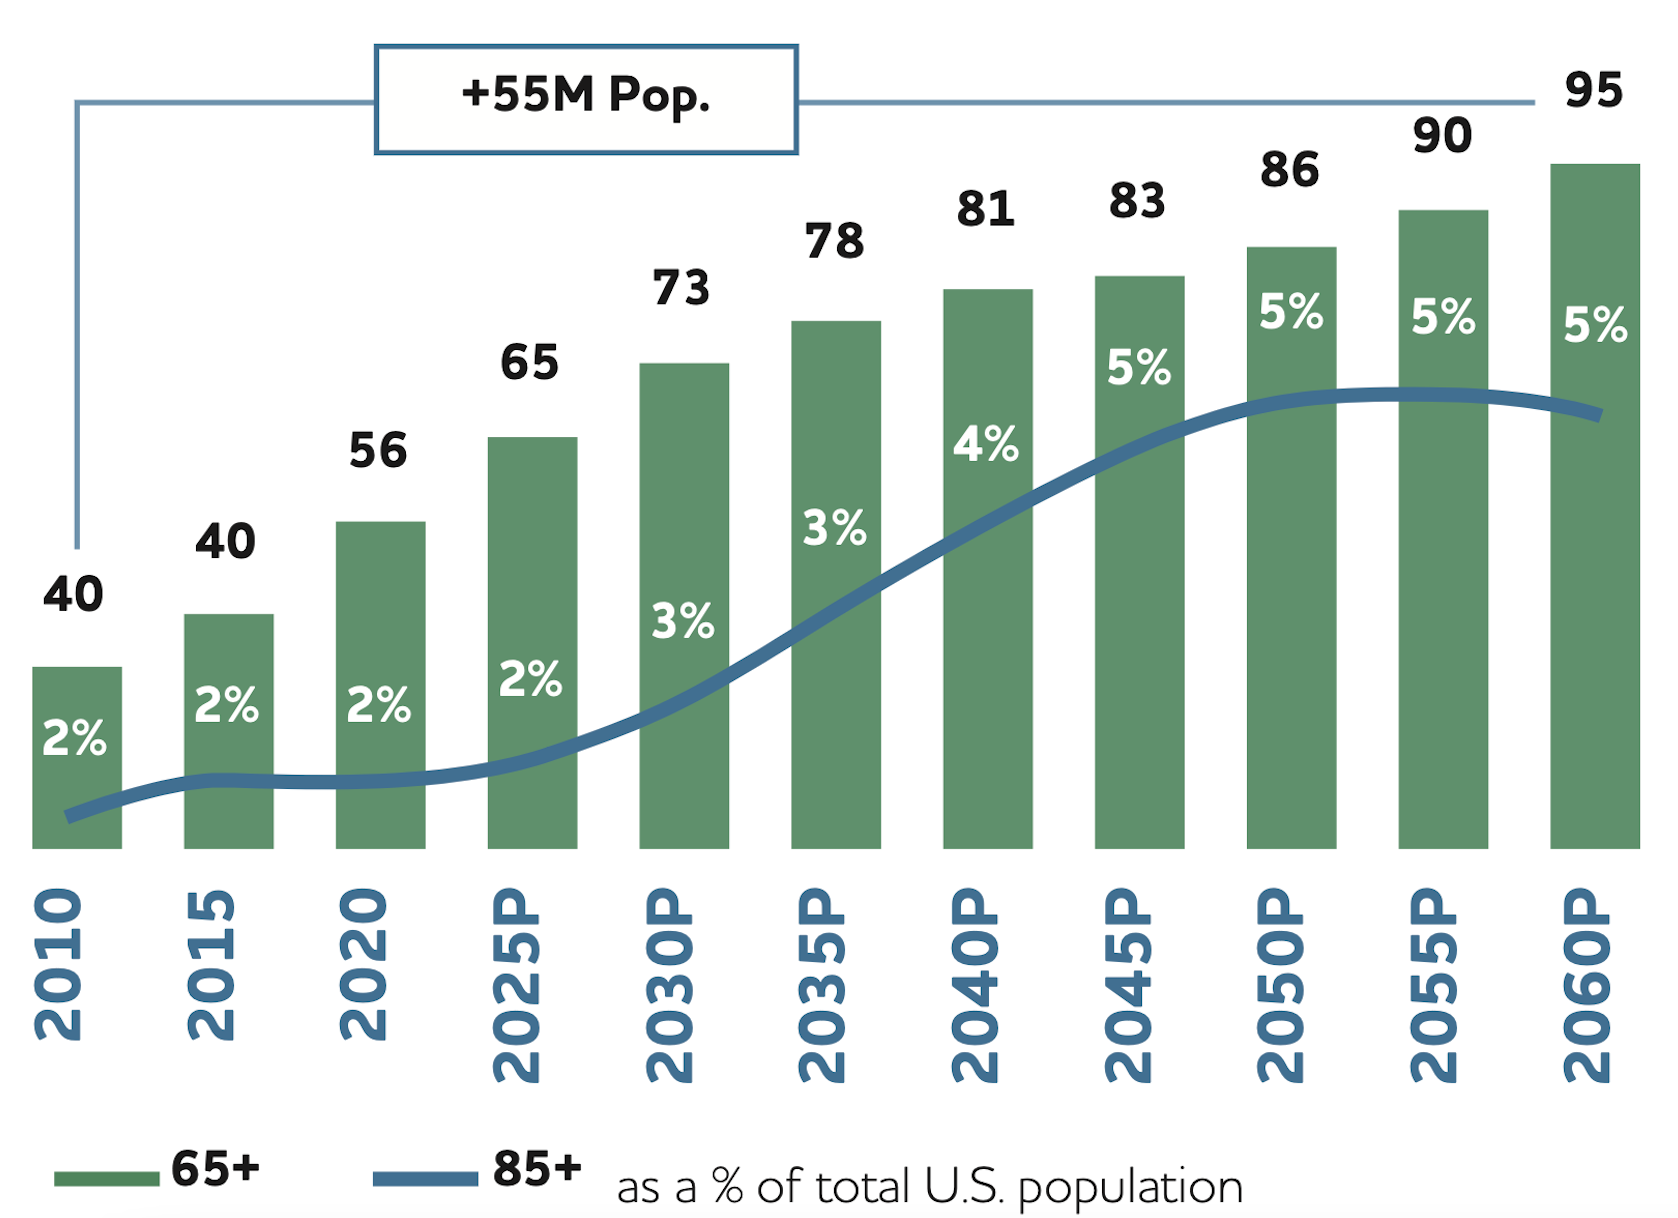 Graph showing growth of the 55+ community from 2010 to projected 2060 from 2% to 5%